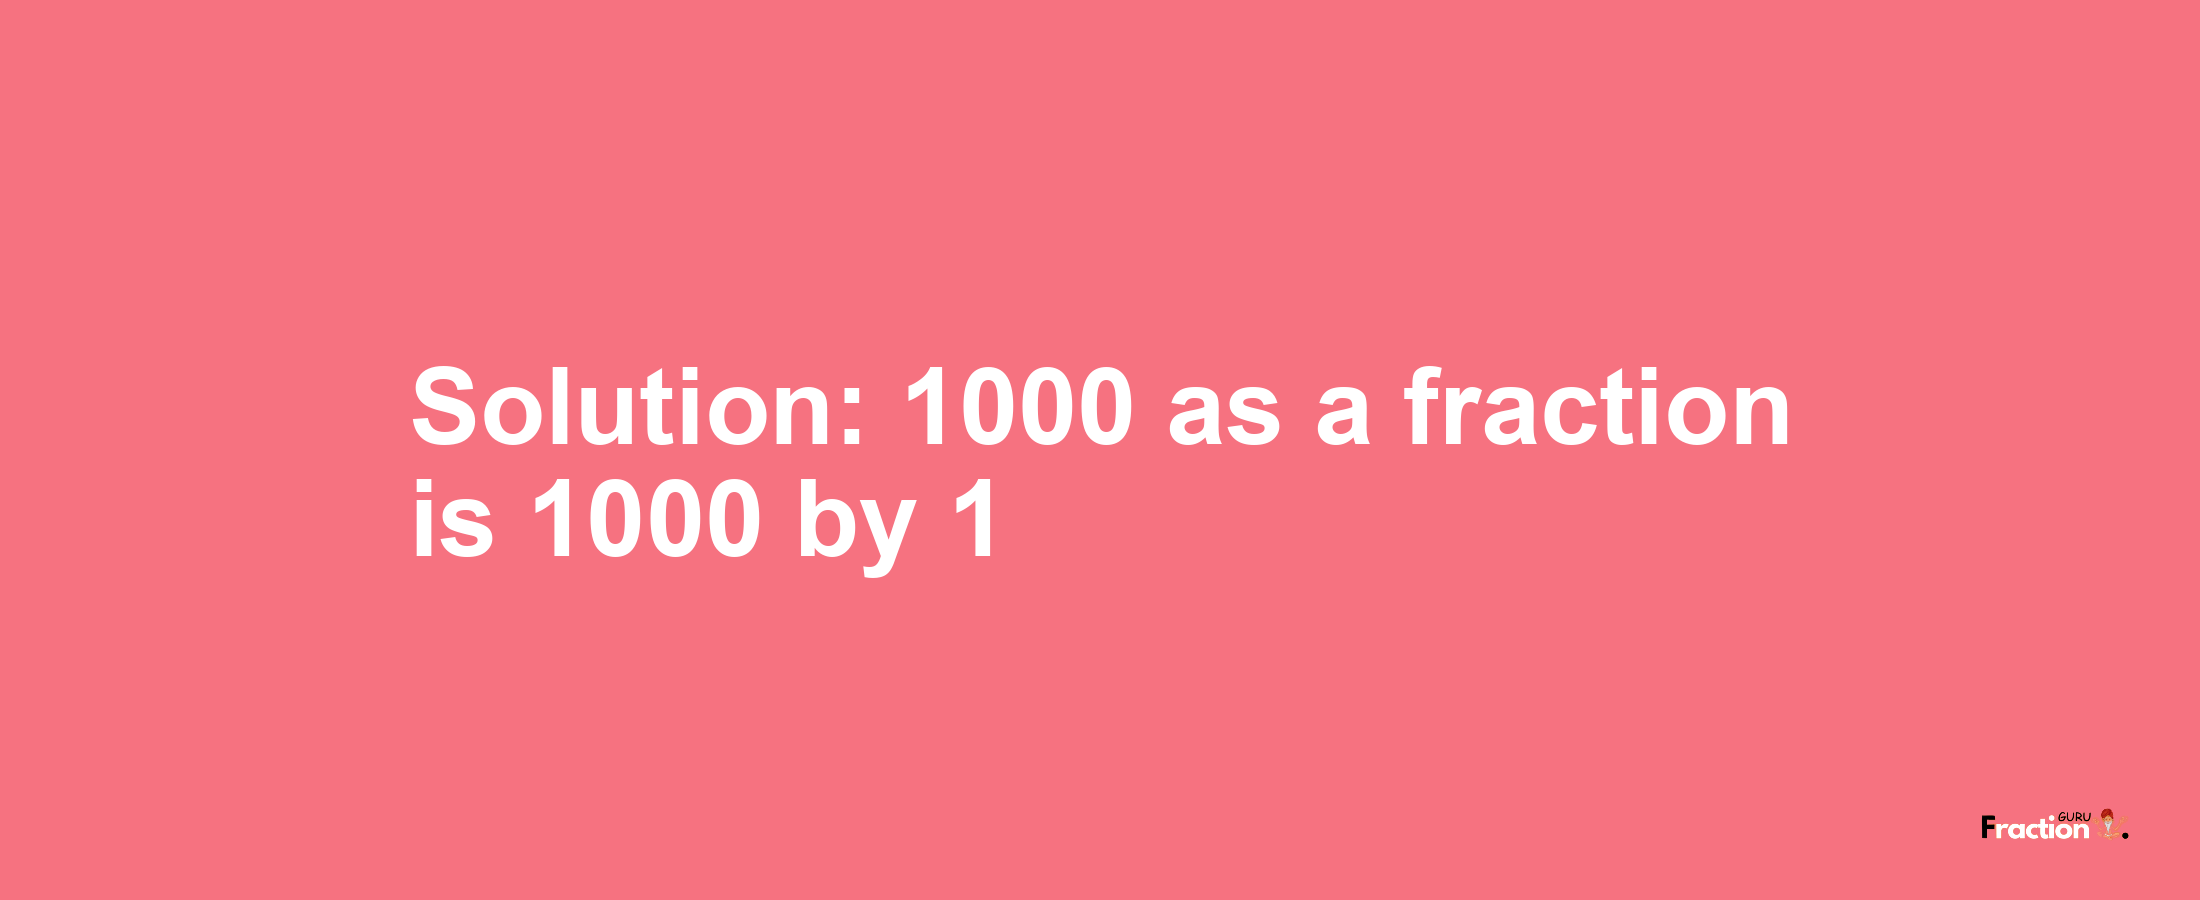 Solution:1000 as a fraction is 1000/1